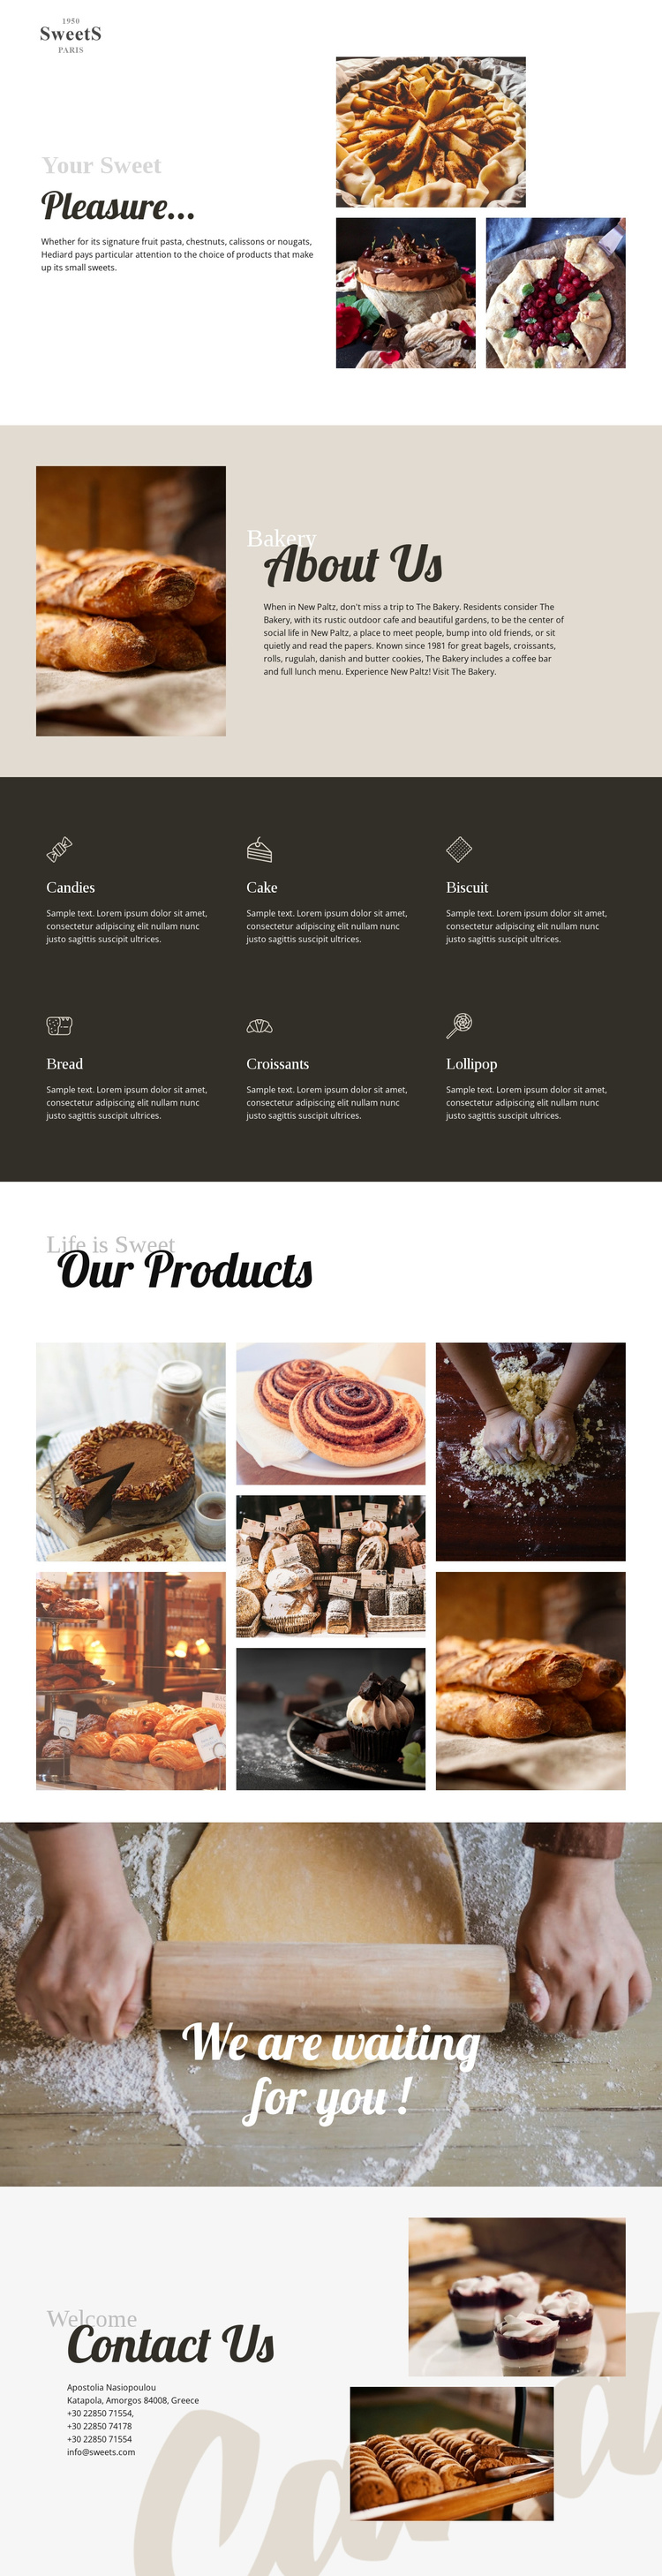 Cakes and baking food Joomla Template